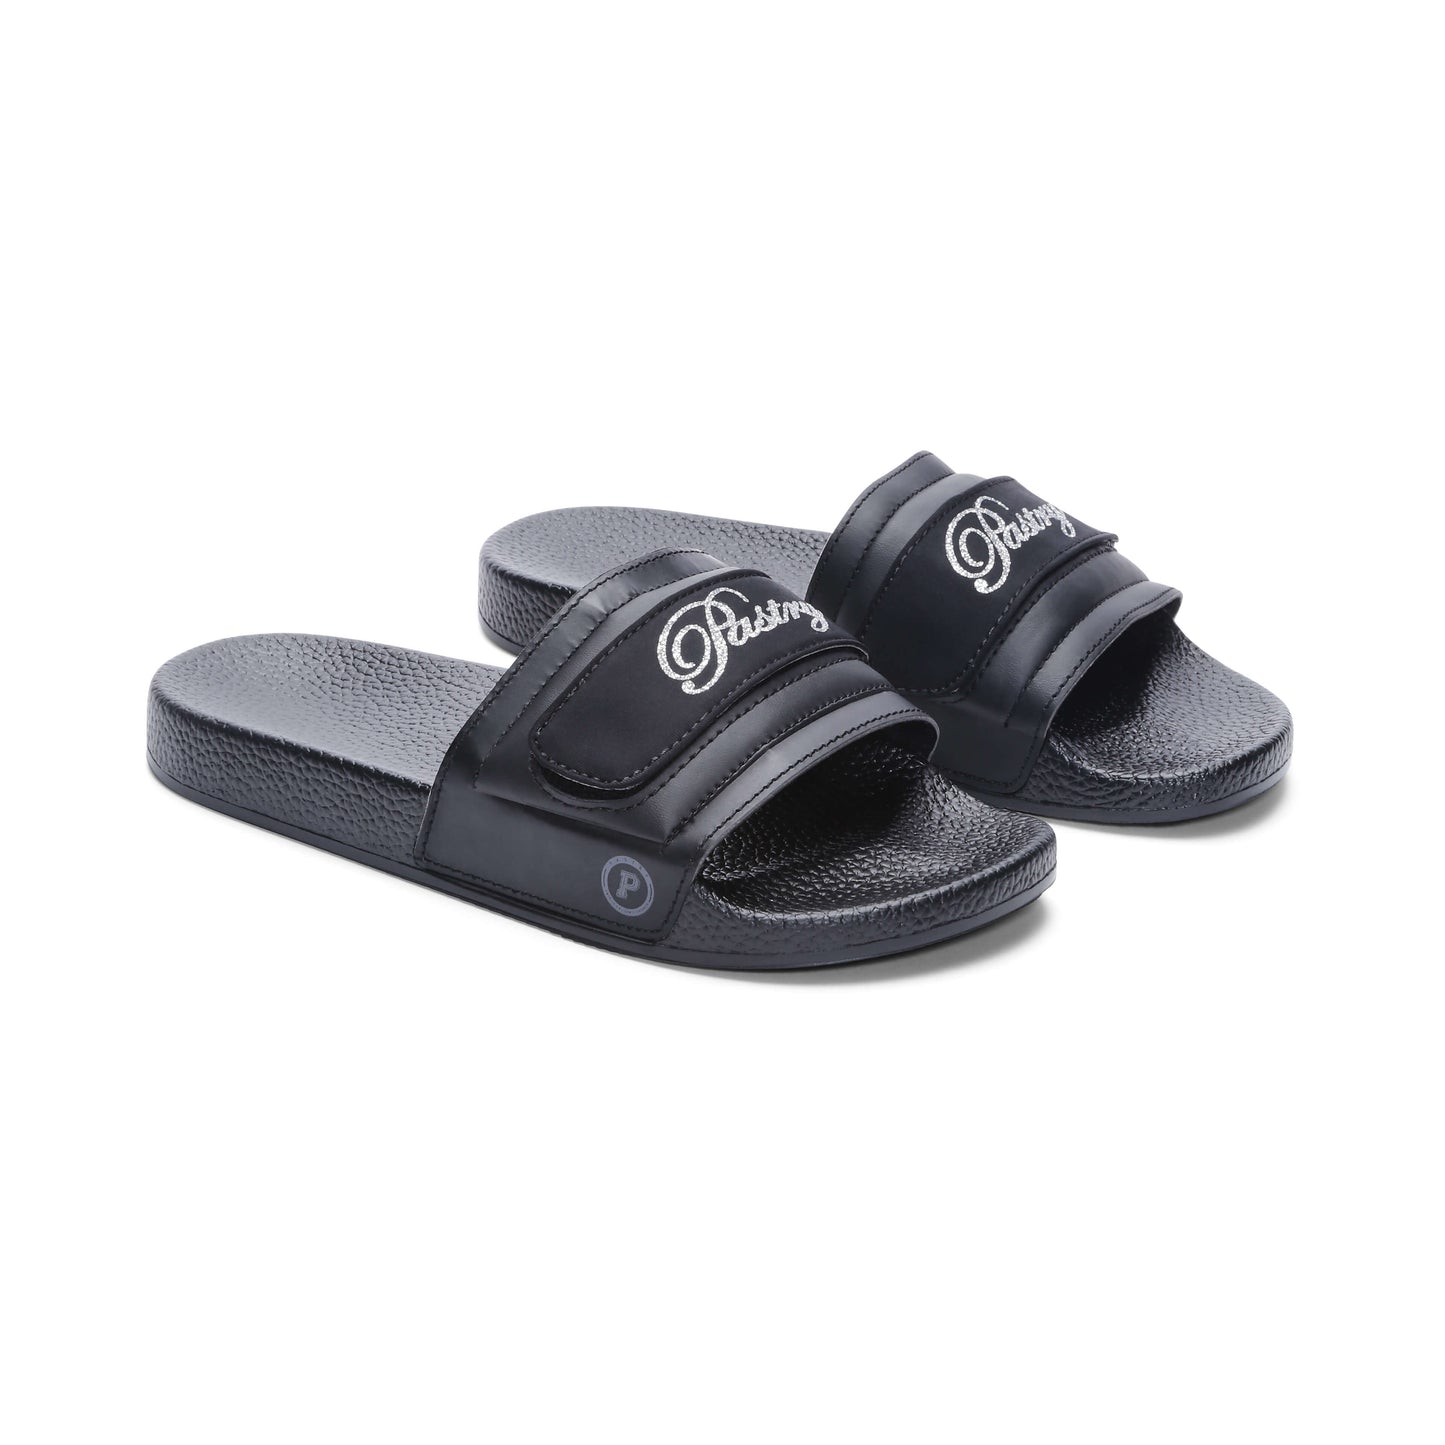 Pair of Pastry Adult Women's Recovery Slide Customized with Pastry Logo Straps